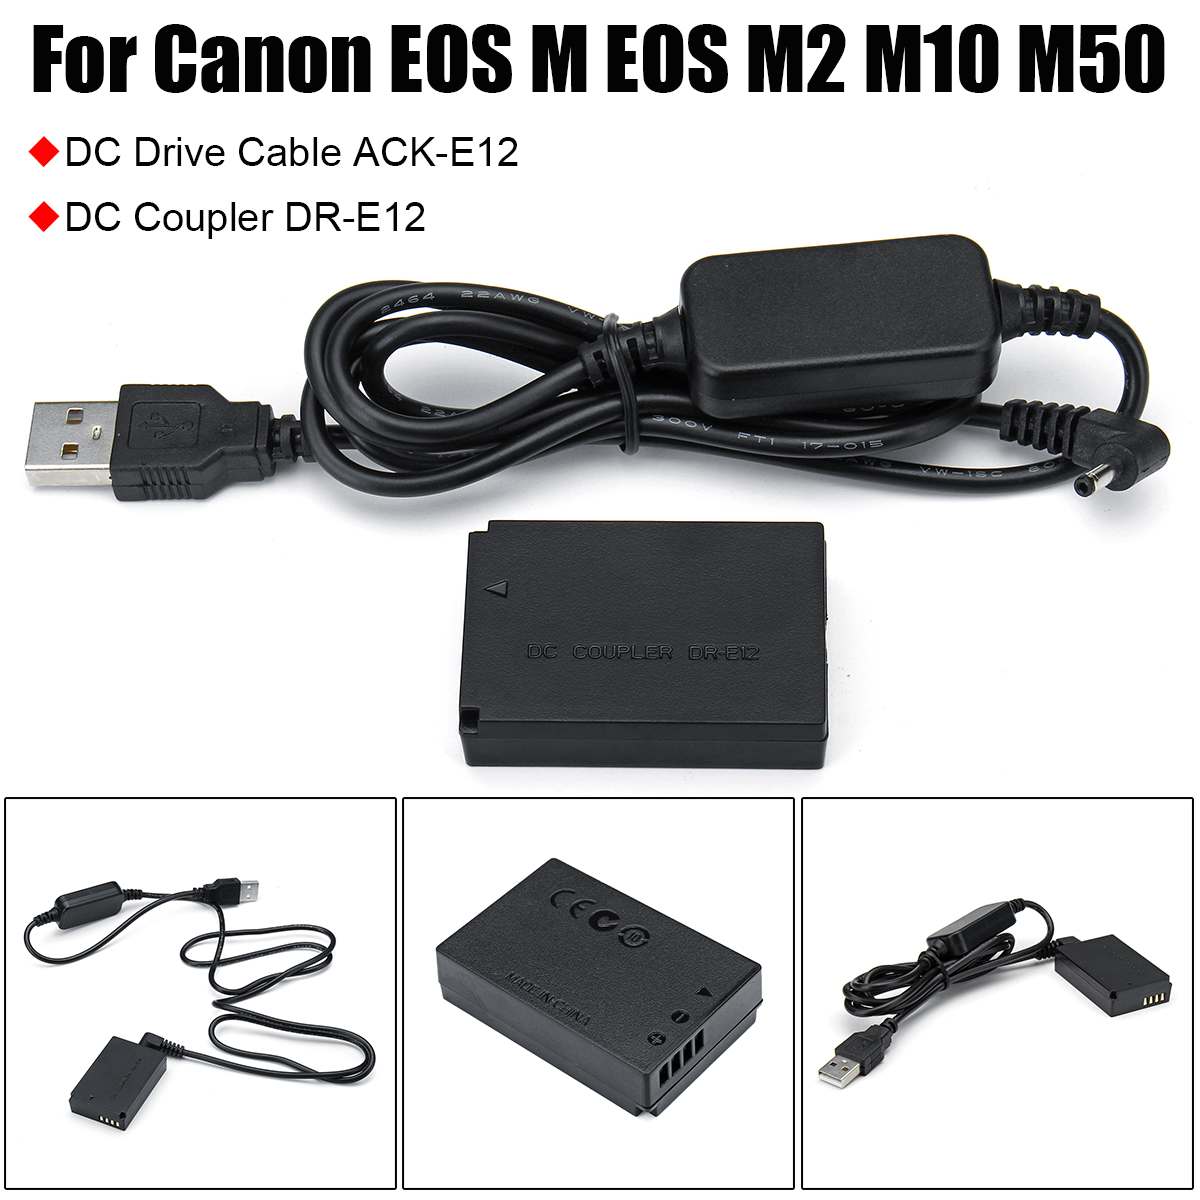 5V 2.4A Drive ACKE12 ACK-E12 CA-PS700 Usb Kabel Adapter + LP-E12 DR-E12 Dc Koppeling Voor Canon Eos M M2 m10 M50 Camera 'S